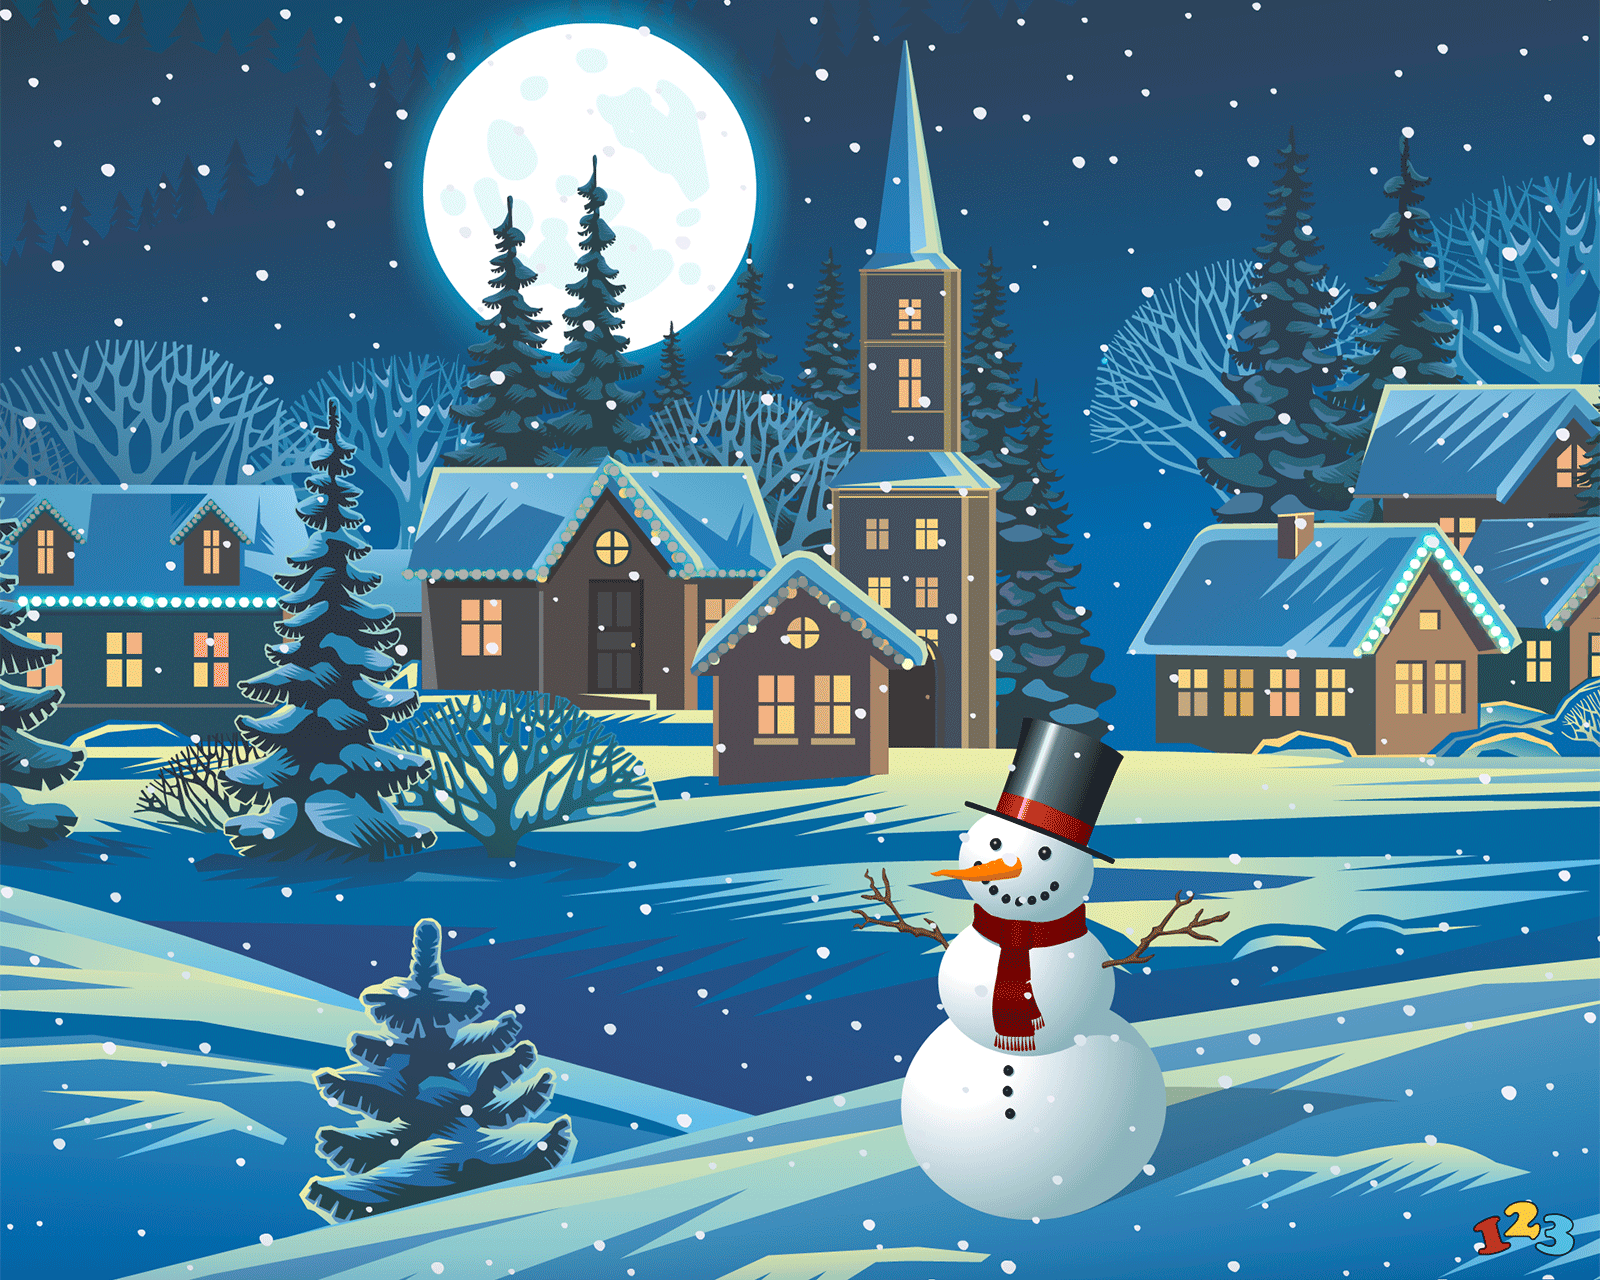 Happy snowman - Happy Holidays - send free eCards from 123cards.com